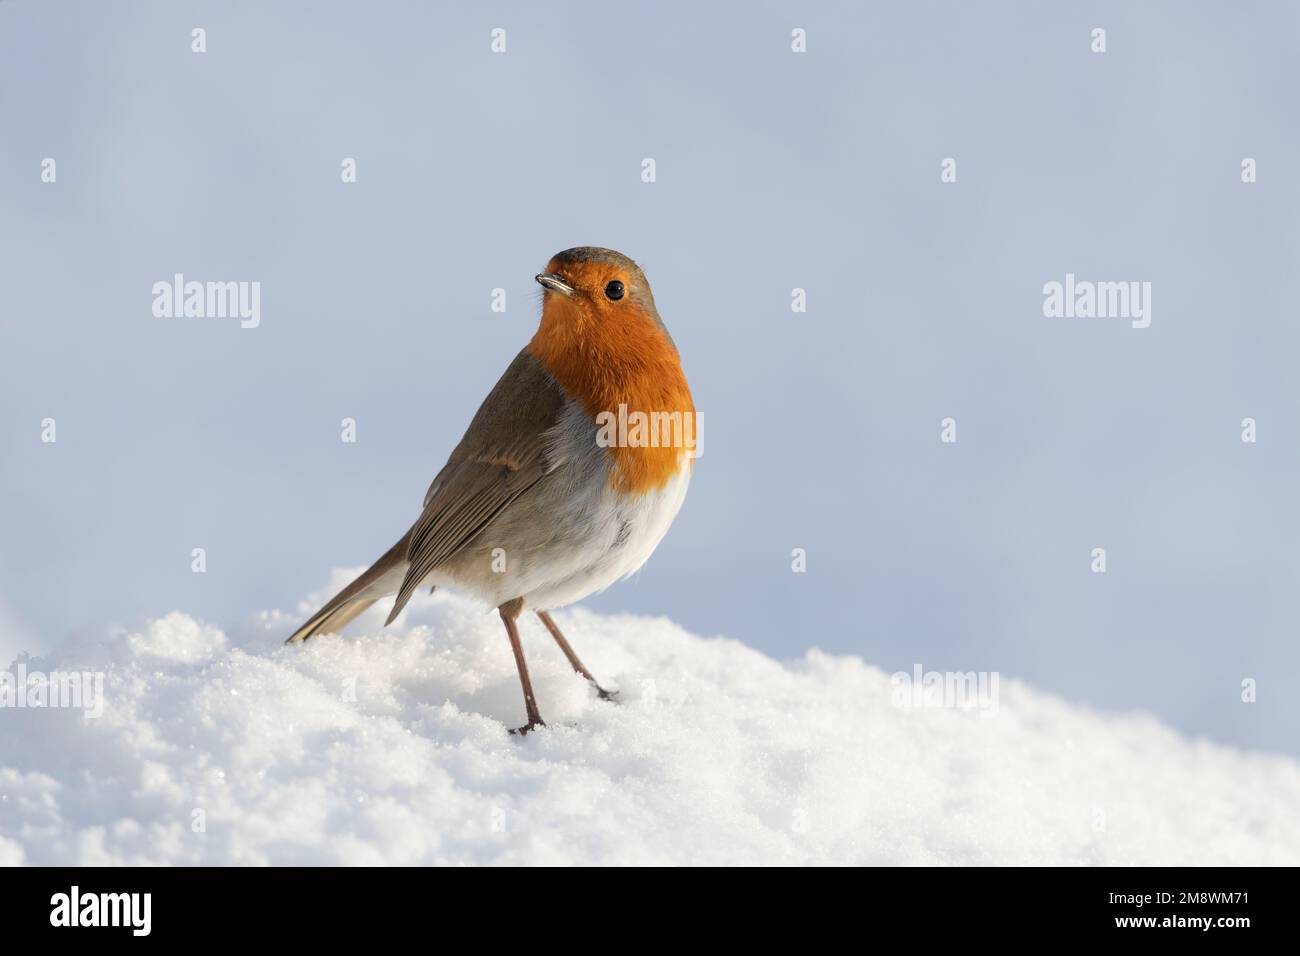 A Robin Redbreast (Erithacus Rubecula) Stood on the Ground in Snow in Winter Sunshine Stock Photo